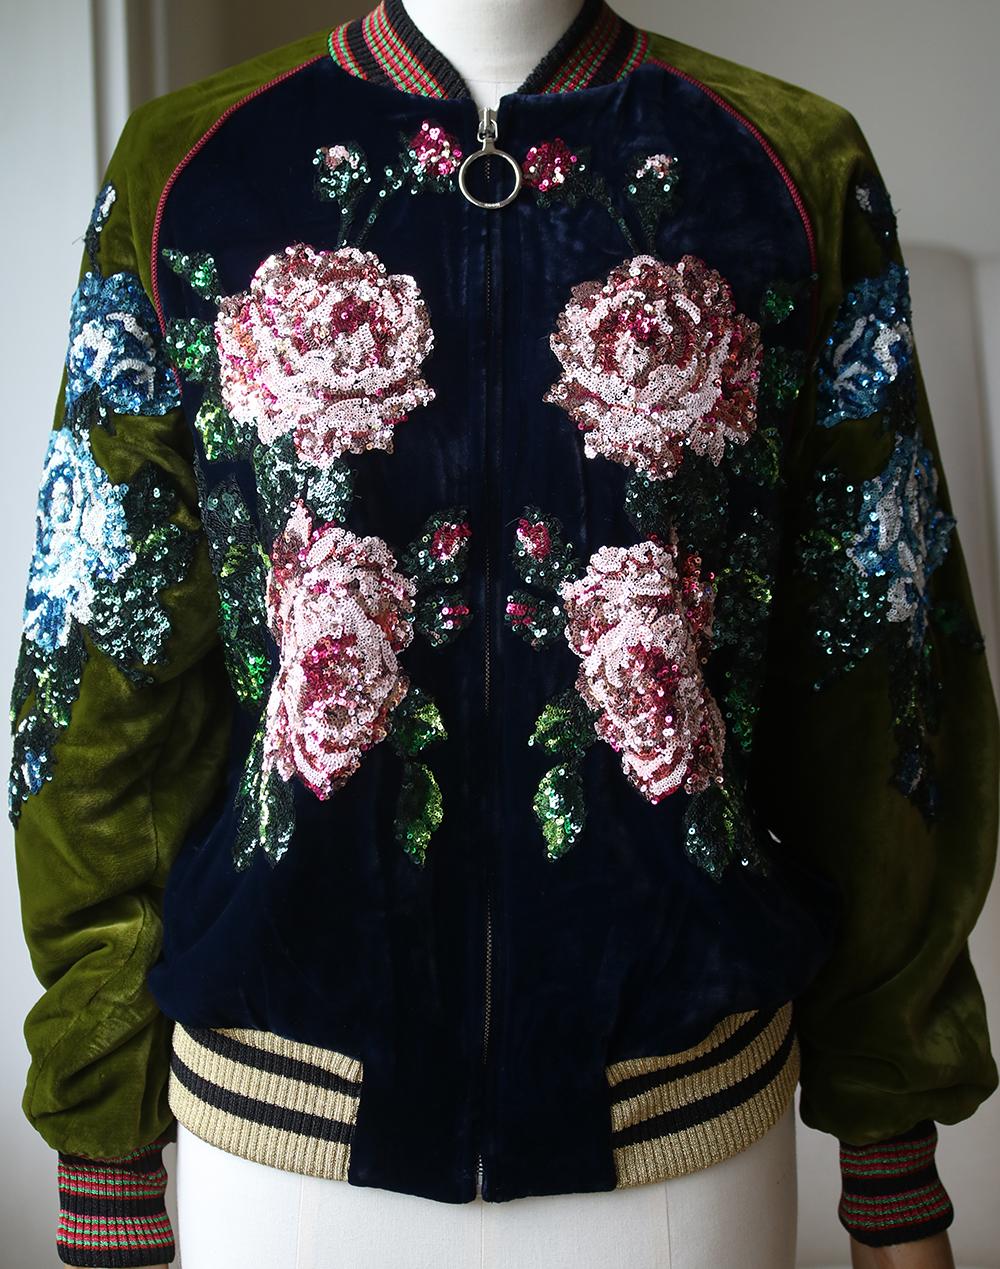 Add a dash of Gucci glamour to your wardrobe with this sequin floral detailed bomber jacket. From the Autumn Winter 2017 collection, this bomber jacket is crafted from a luxury Italian silk blend and features a panelled colour block design and an